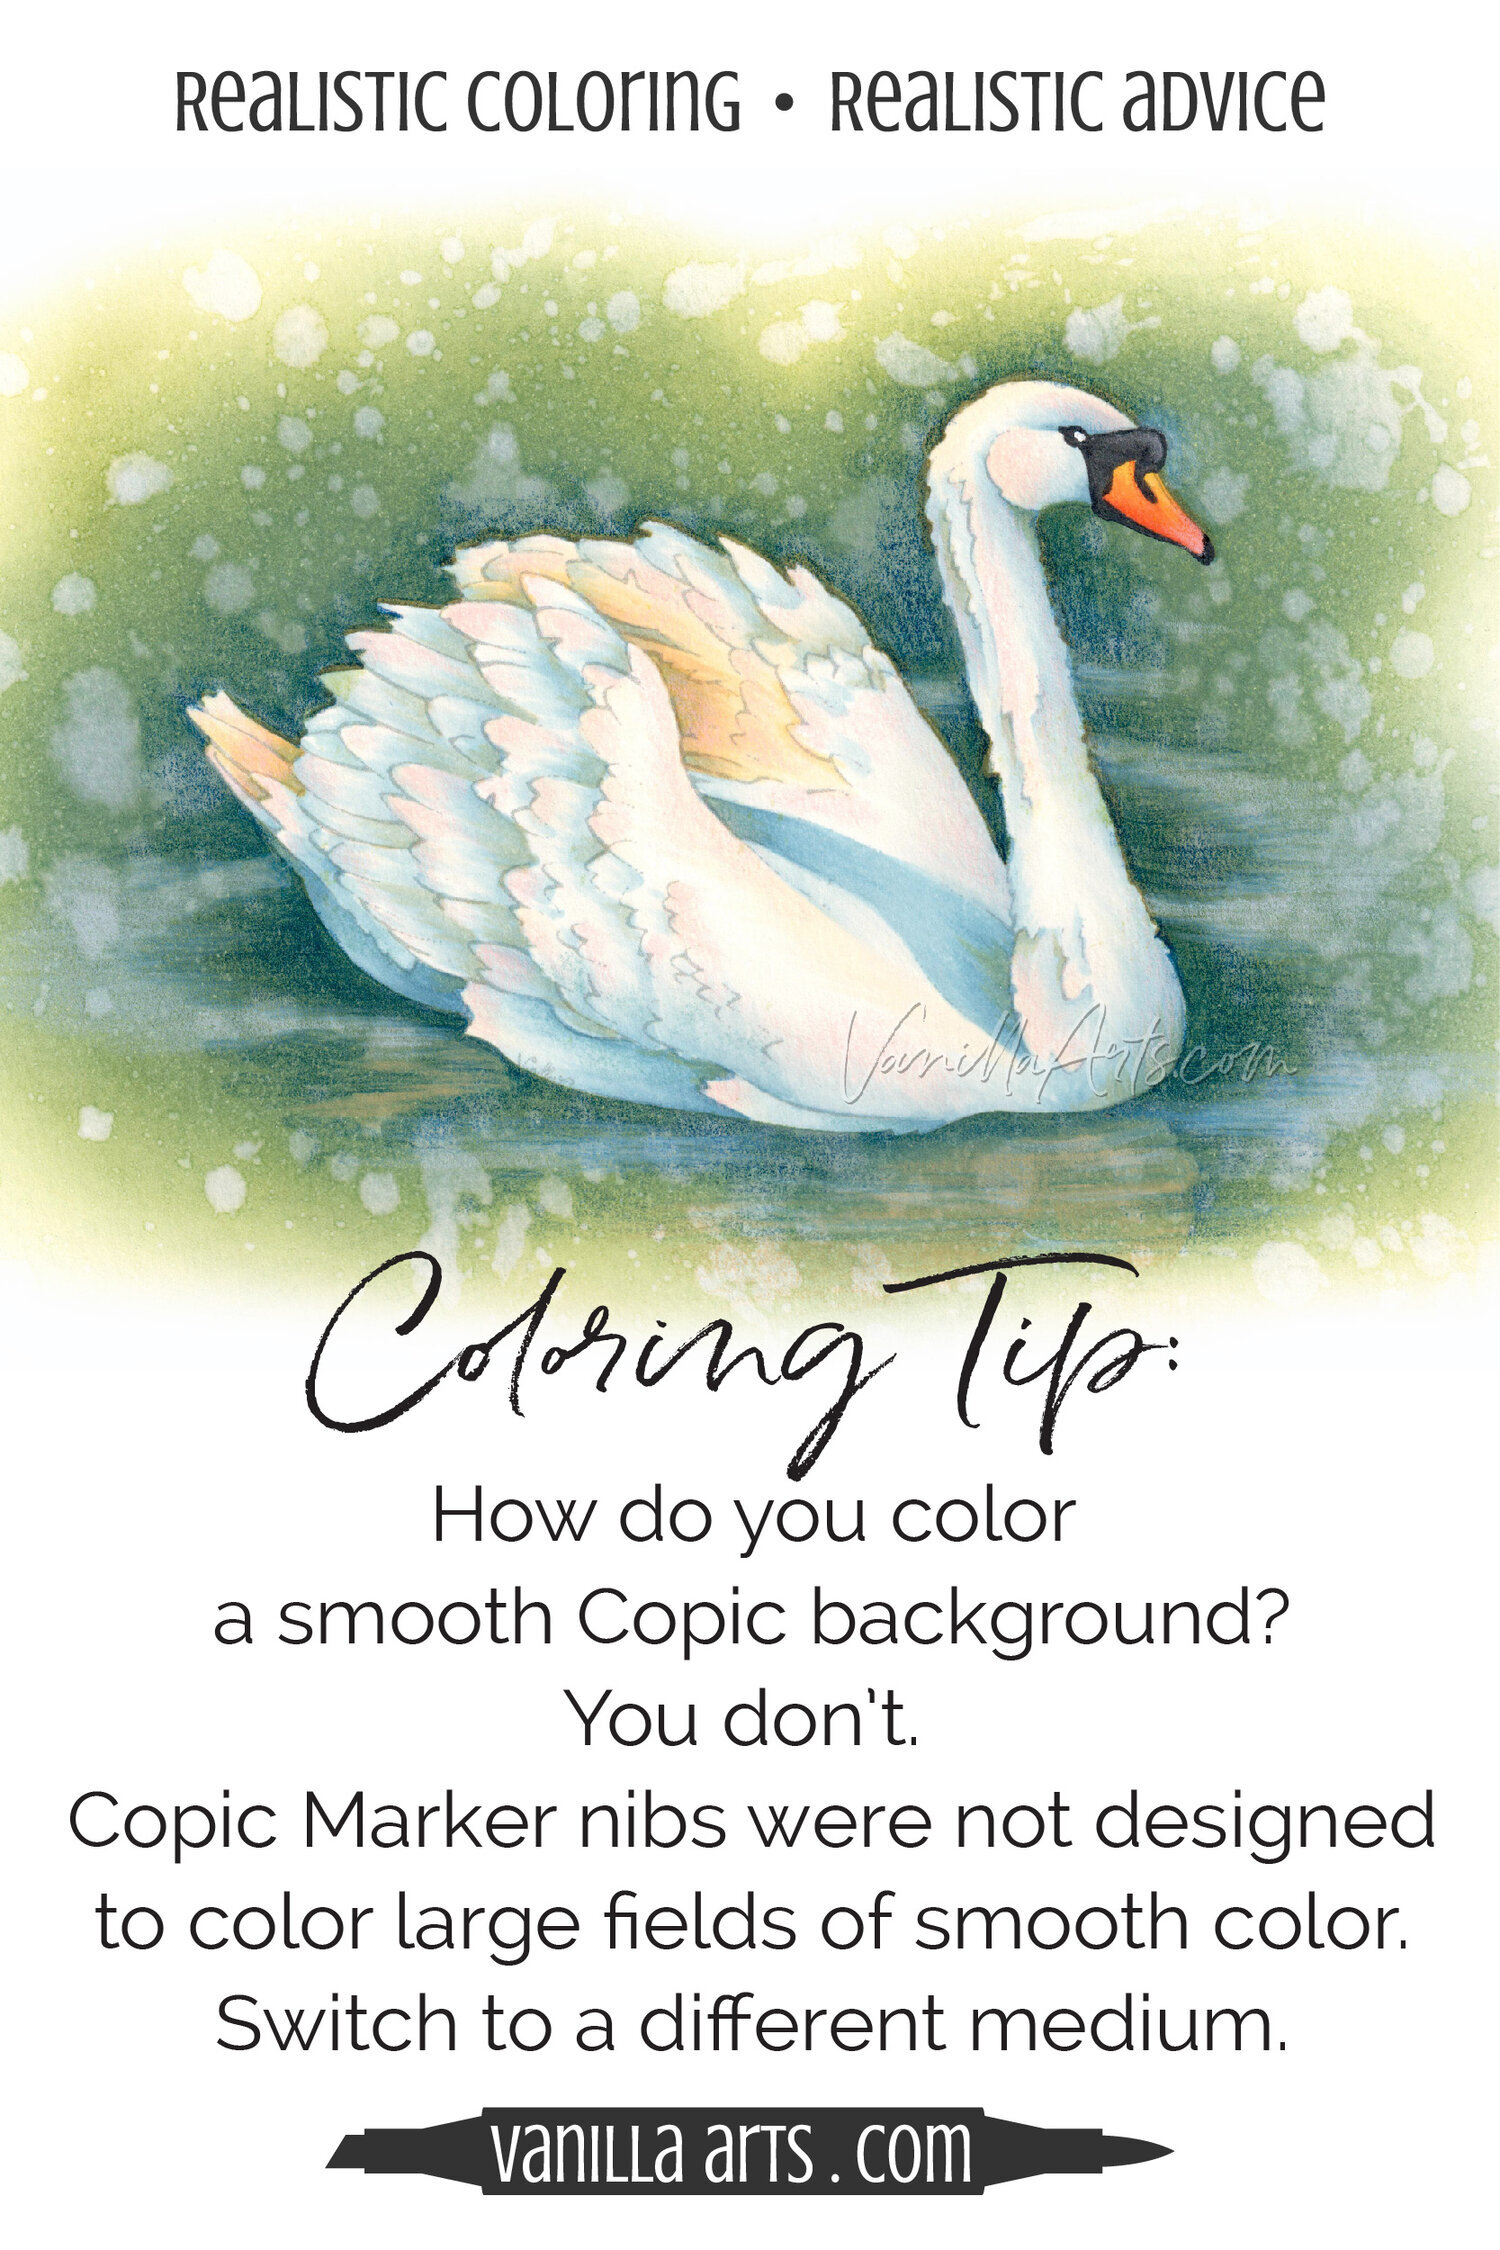 Coloring Tip: Copic Markers were not designed to color large areas smoothly. To color big backgrounds with no streaks or stripes, you may need to switch mediums. Learn more about smooth backgrounds. |